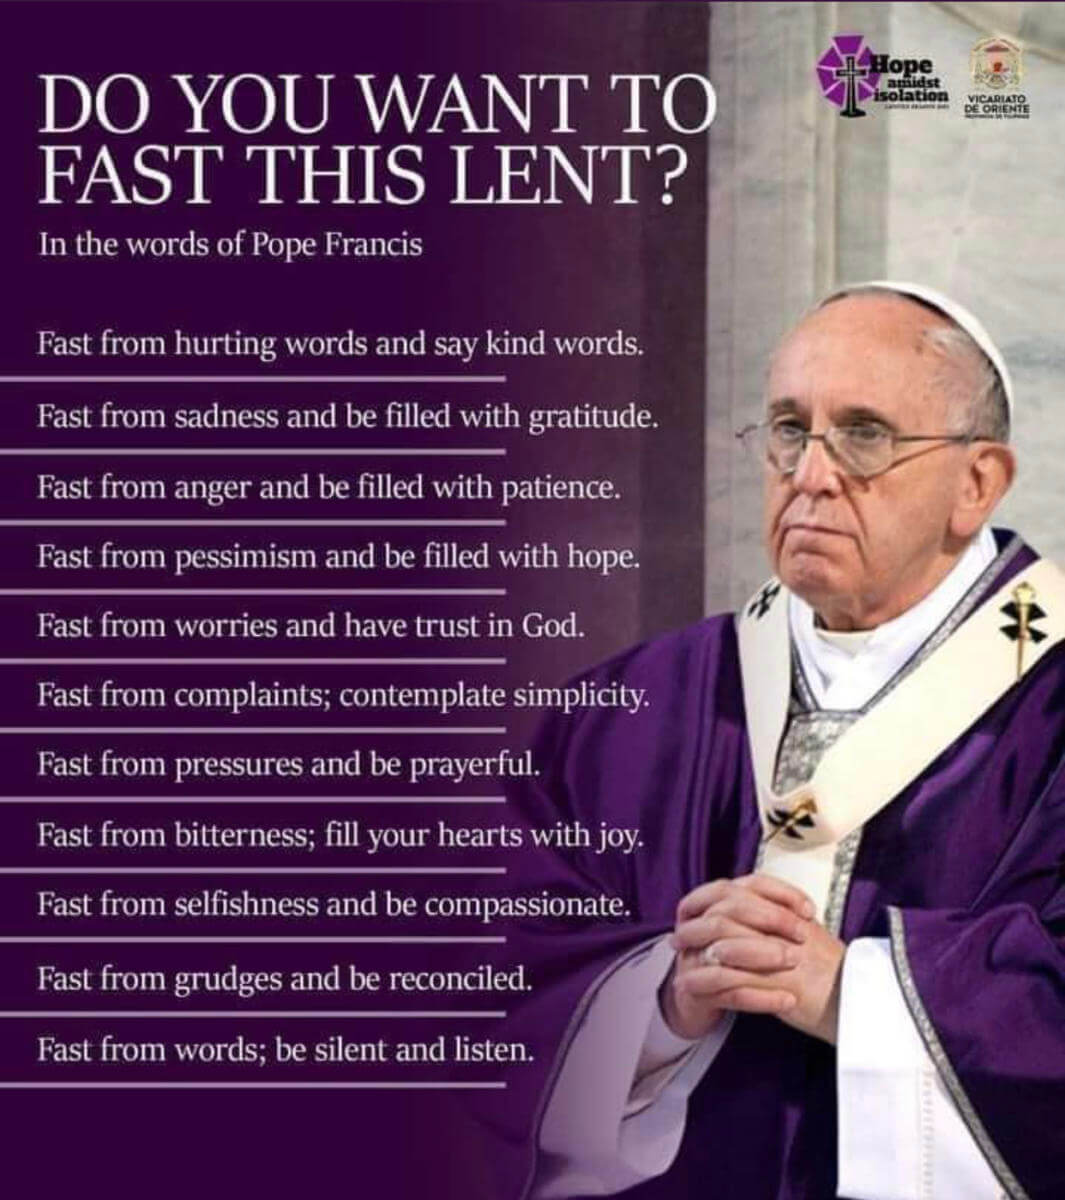 Do you want to fast this Lent? In the words of Pope Francis.